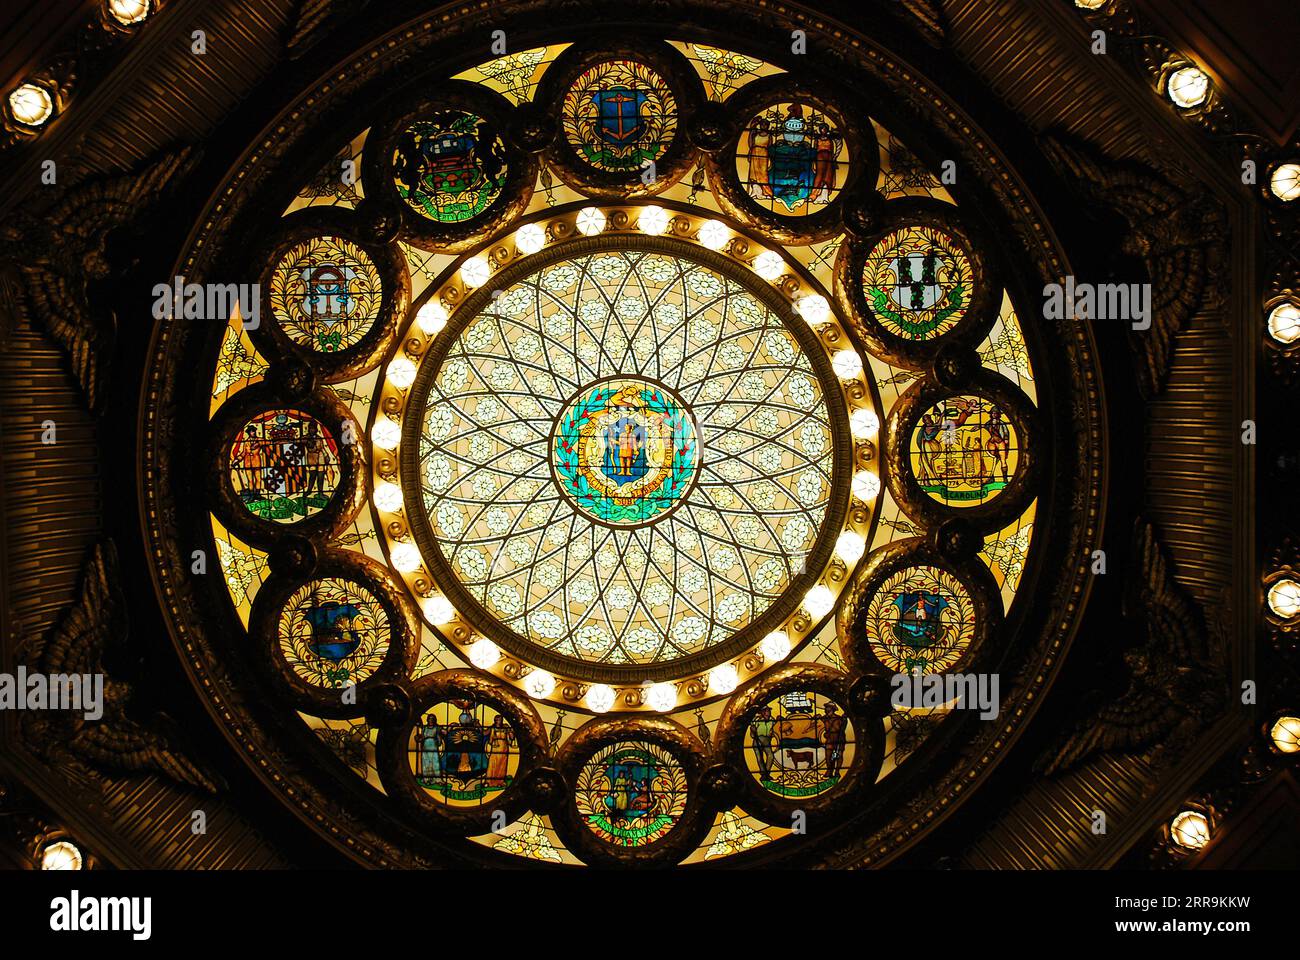 The stained glass window stands above the atrium in the Massachusetts State House, Boston Stock Photo